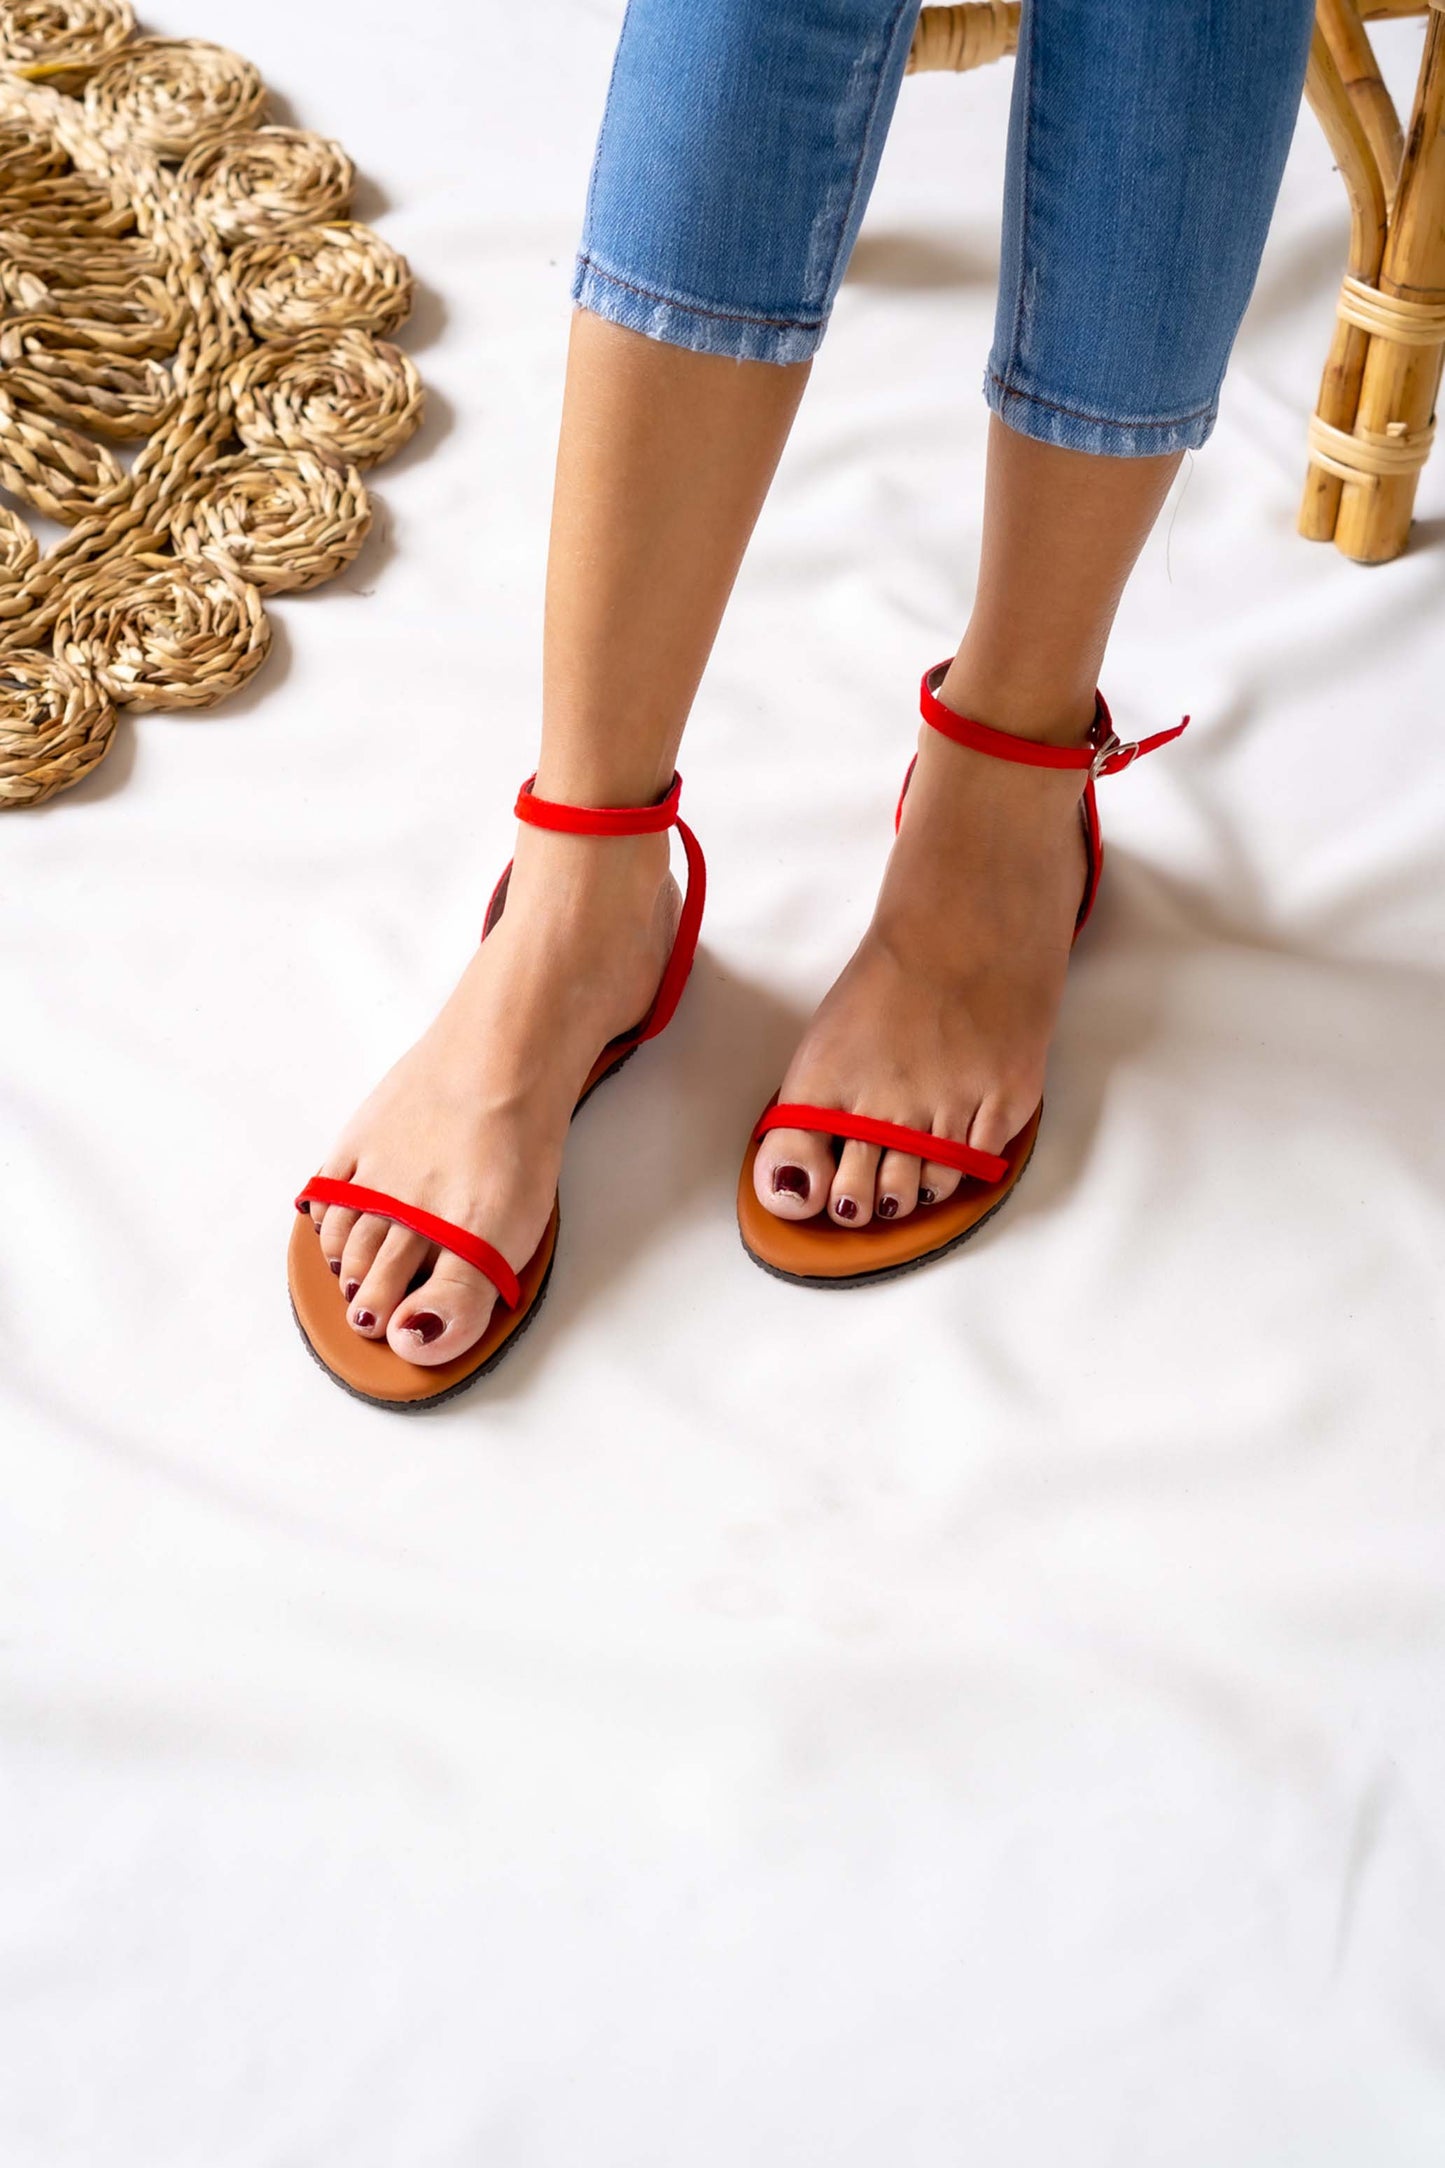 Sunny and stylish, this ladies' red flat sandal brings a pop of color to any outfit